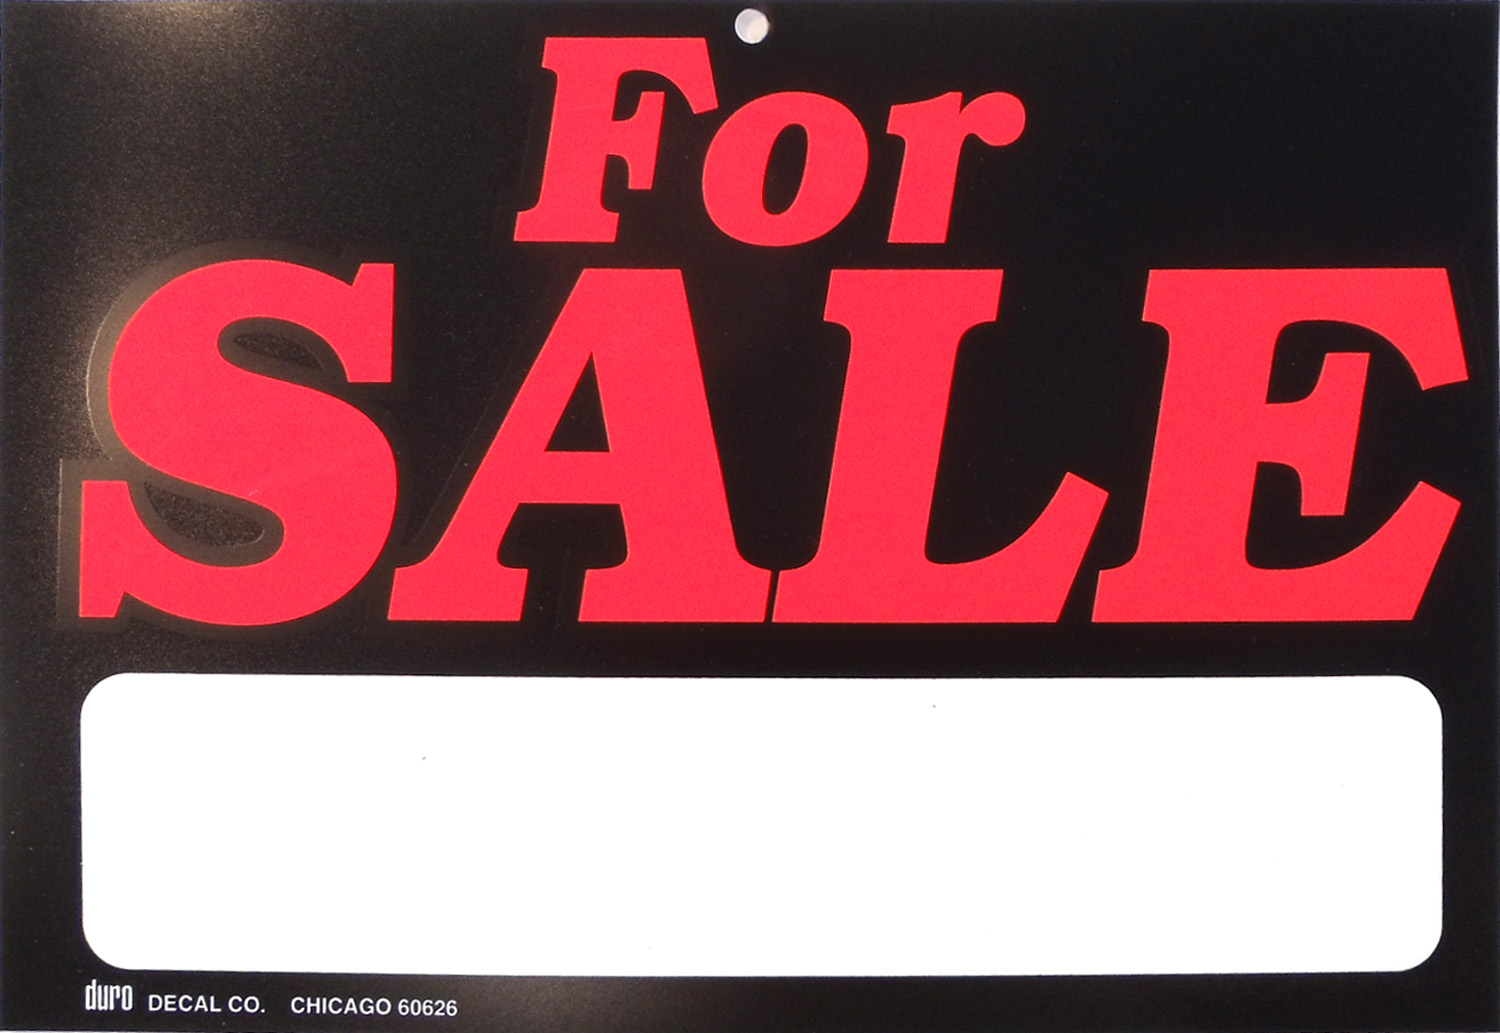 Duro 11-1/2" X 8" Plastic For Sale Sign With Blank Marker Area